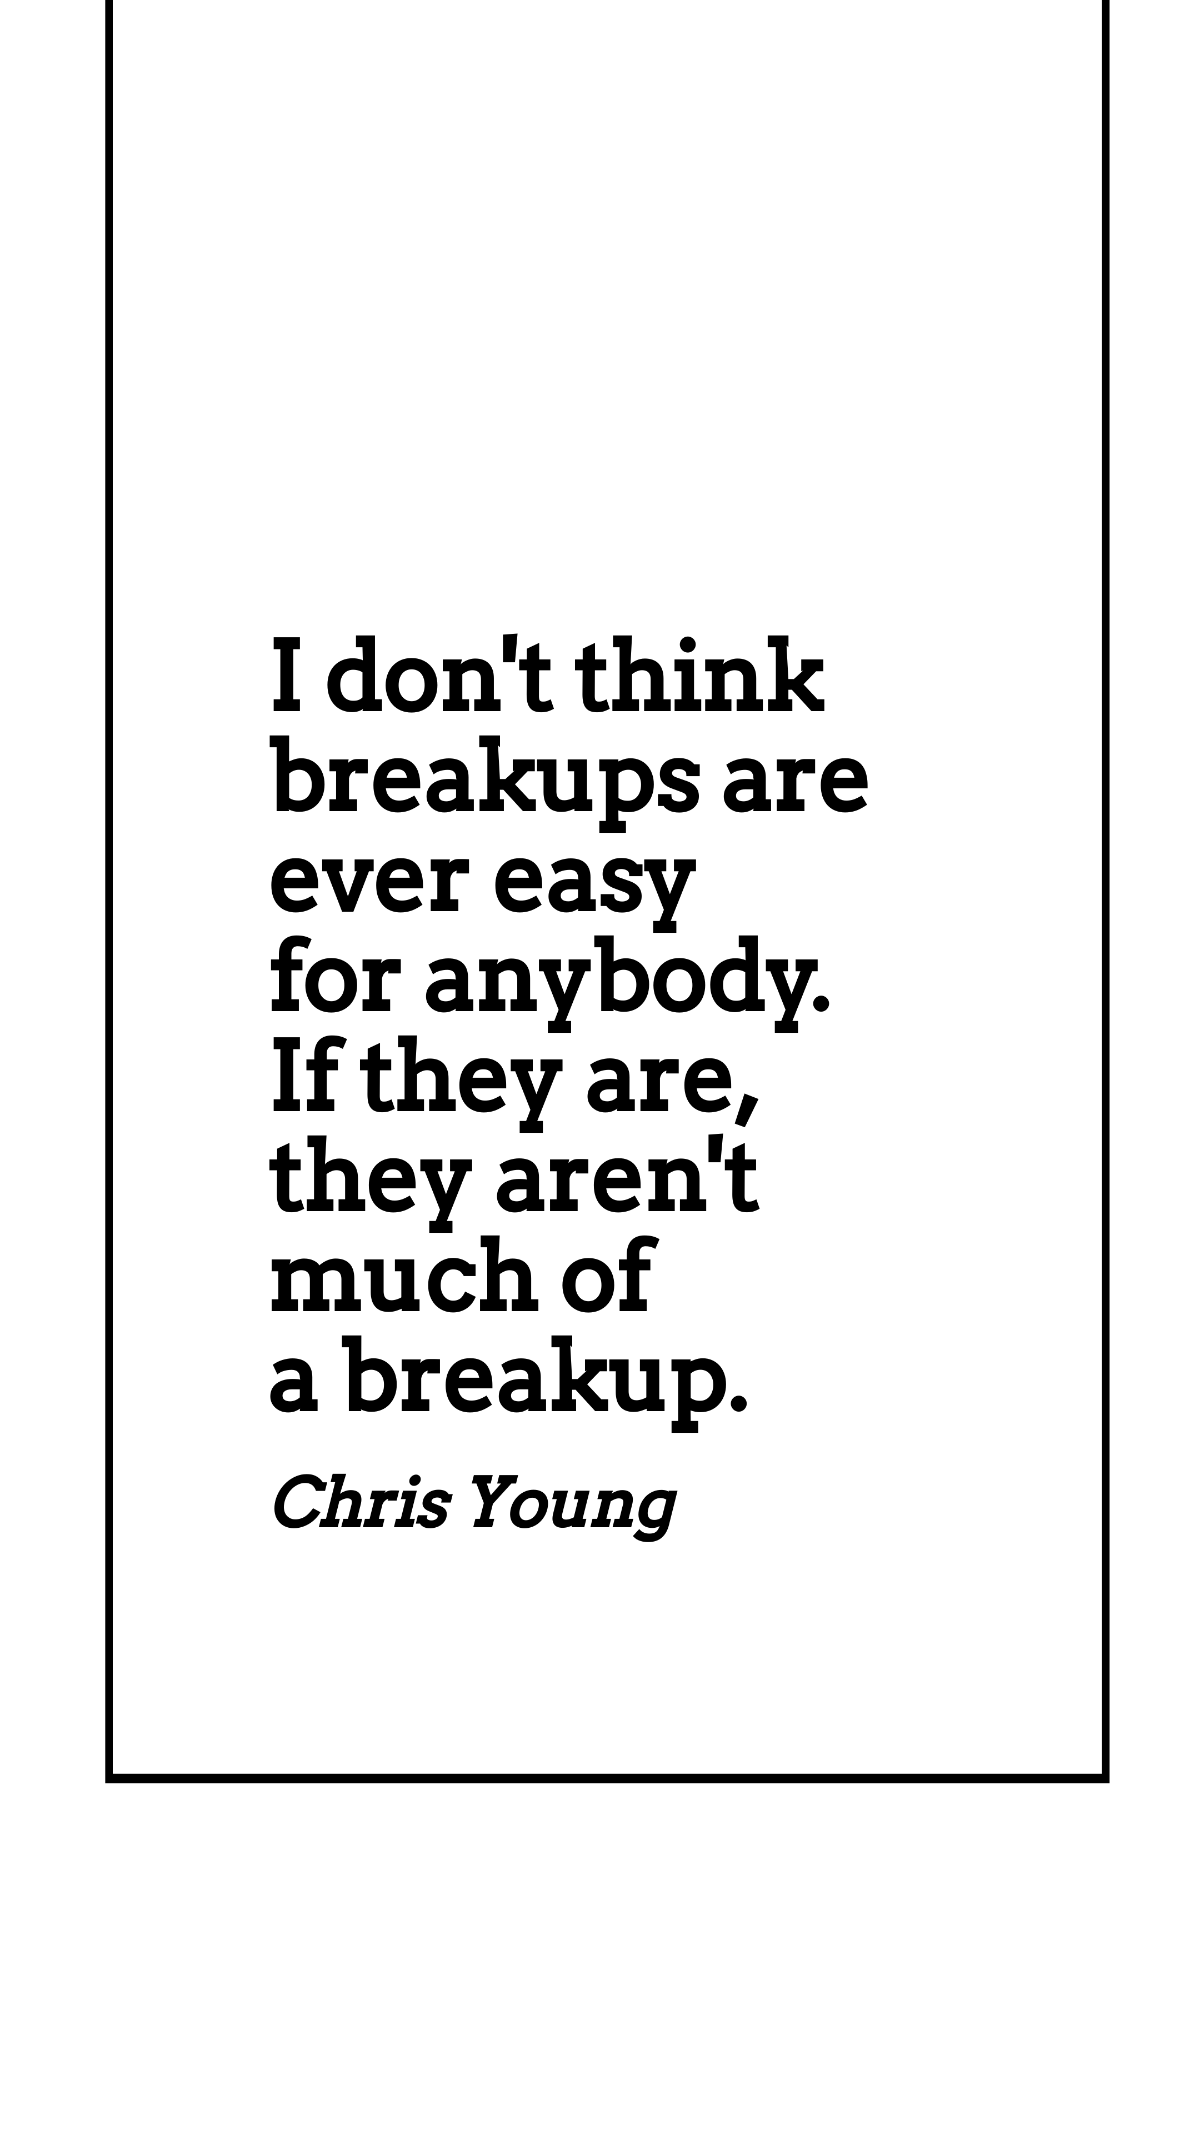 Chris Young - I don't think breakups are ever easy for anybody. If they are, they aren't much of a breakup.